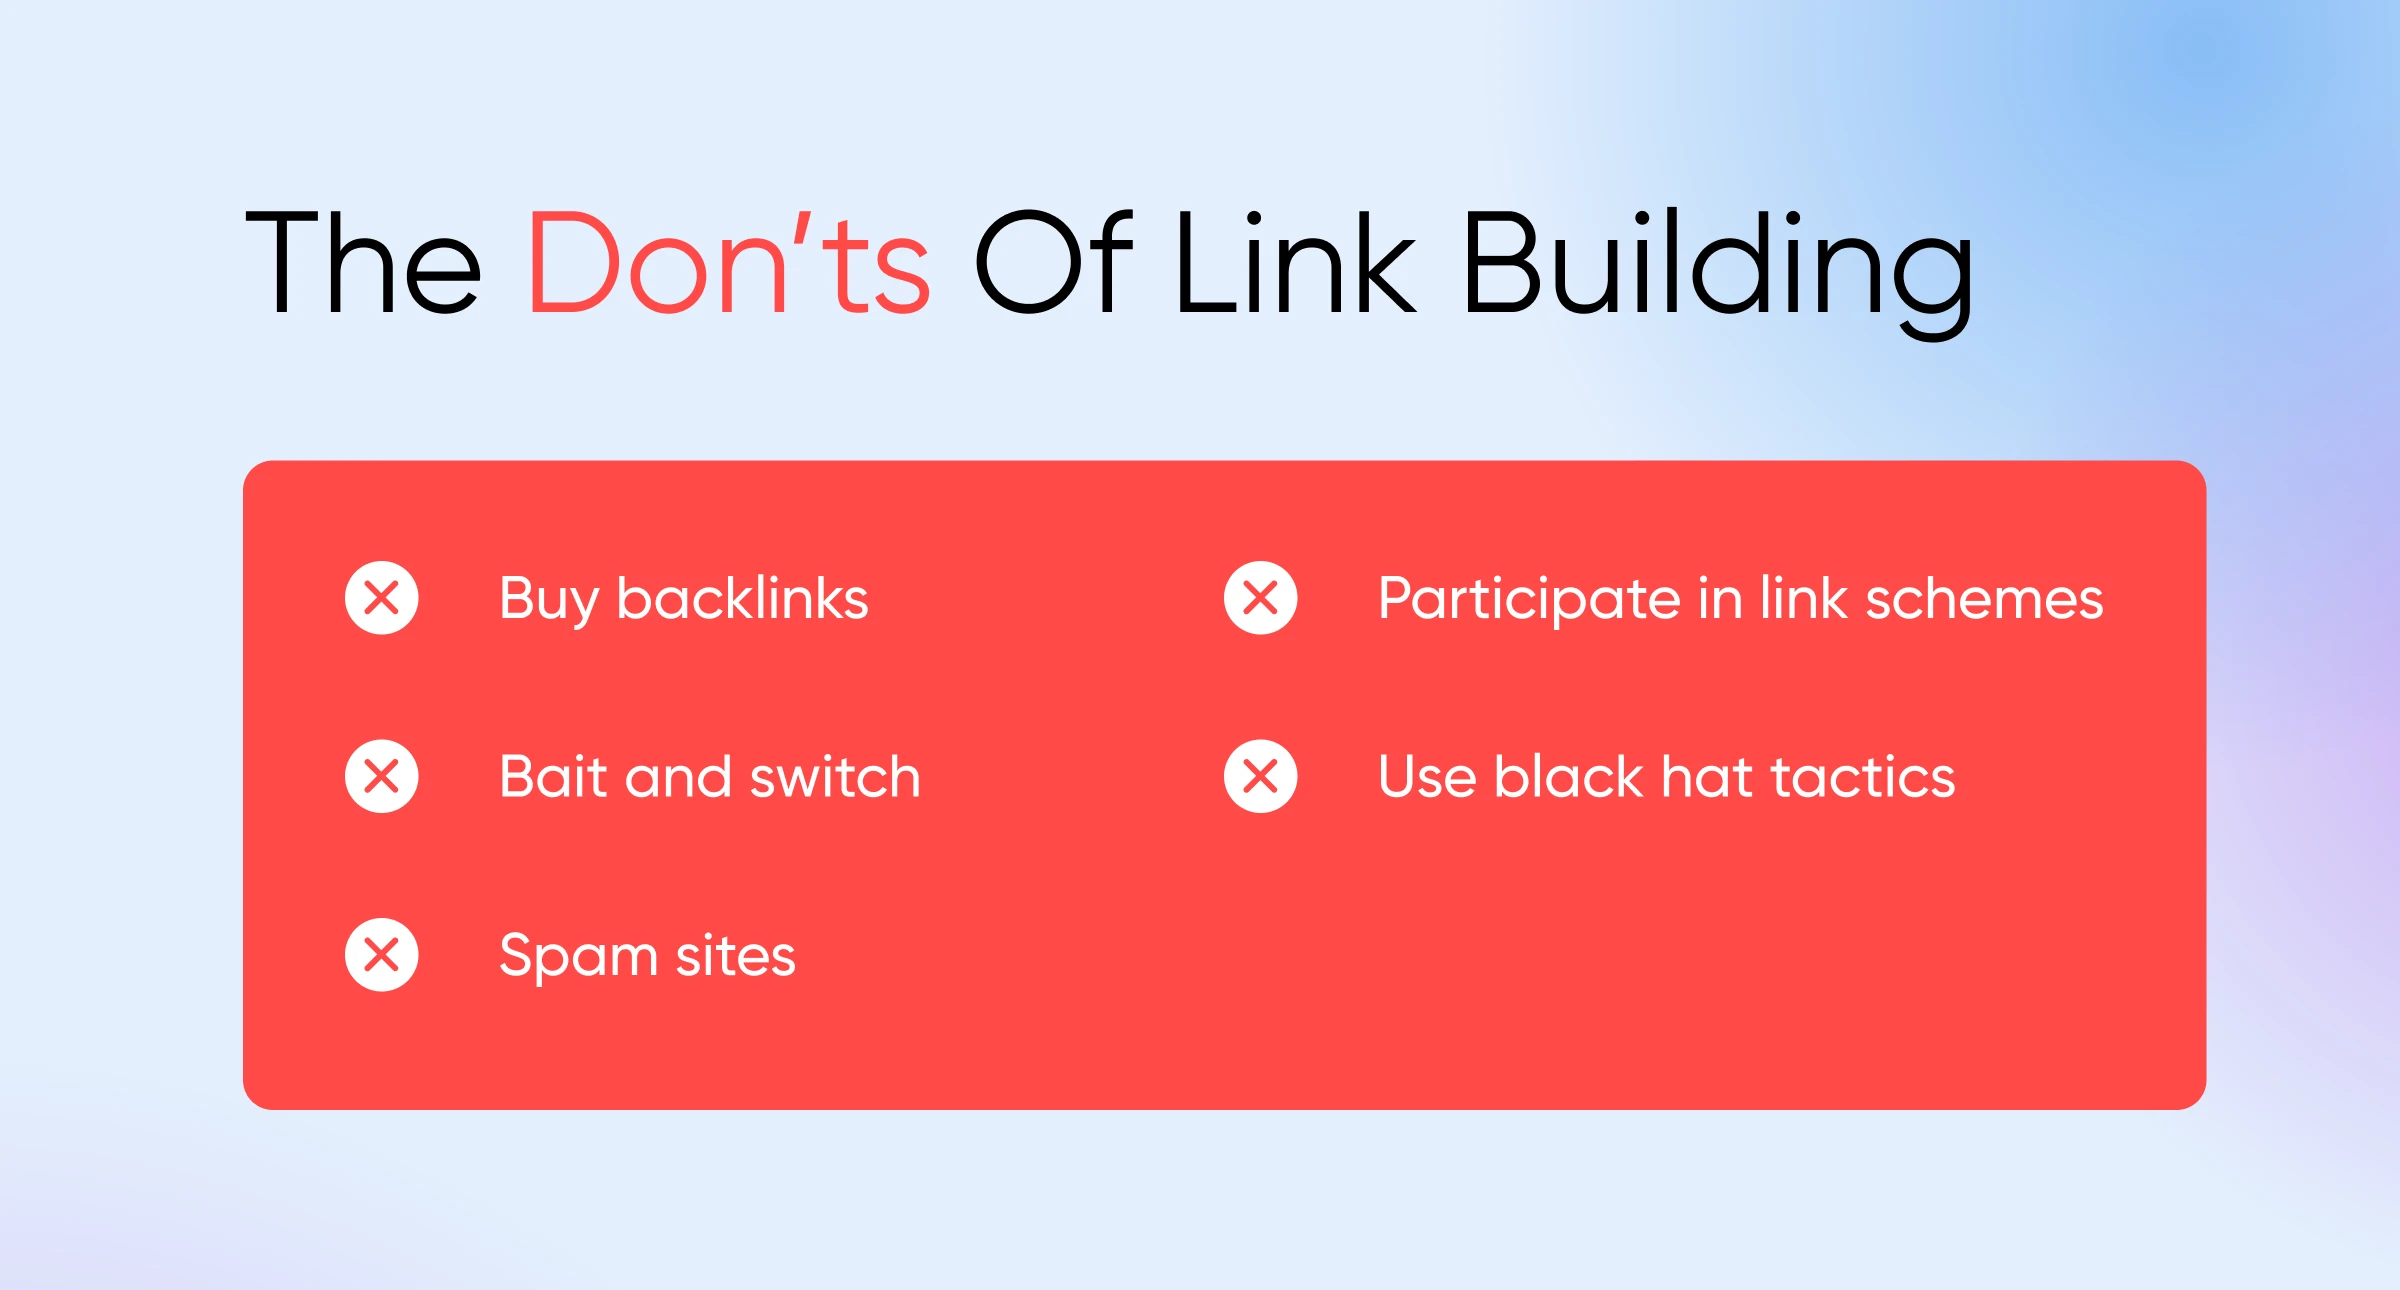 Red infographic of the Don'ts of Link Building: bait and switch, buying backlinks, spamming sites, etc.